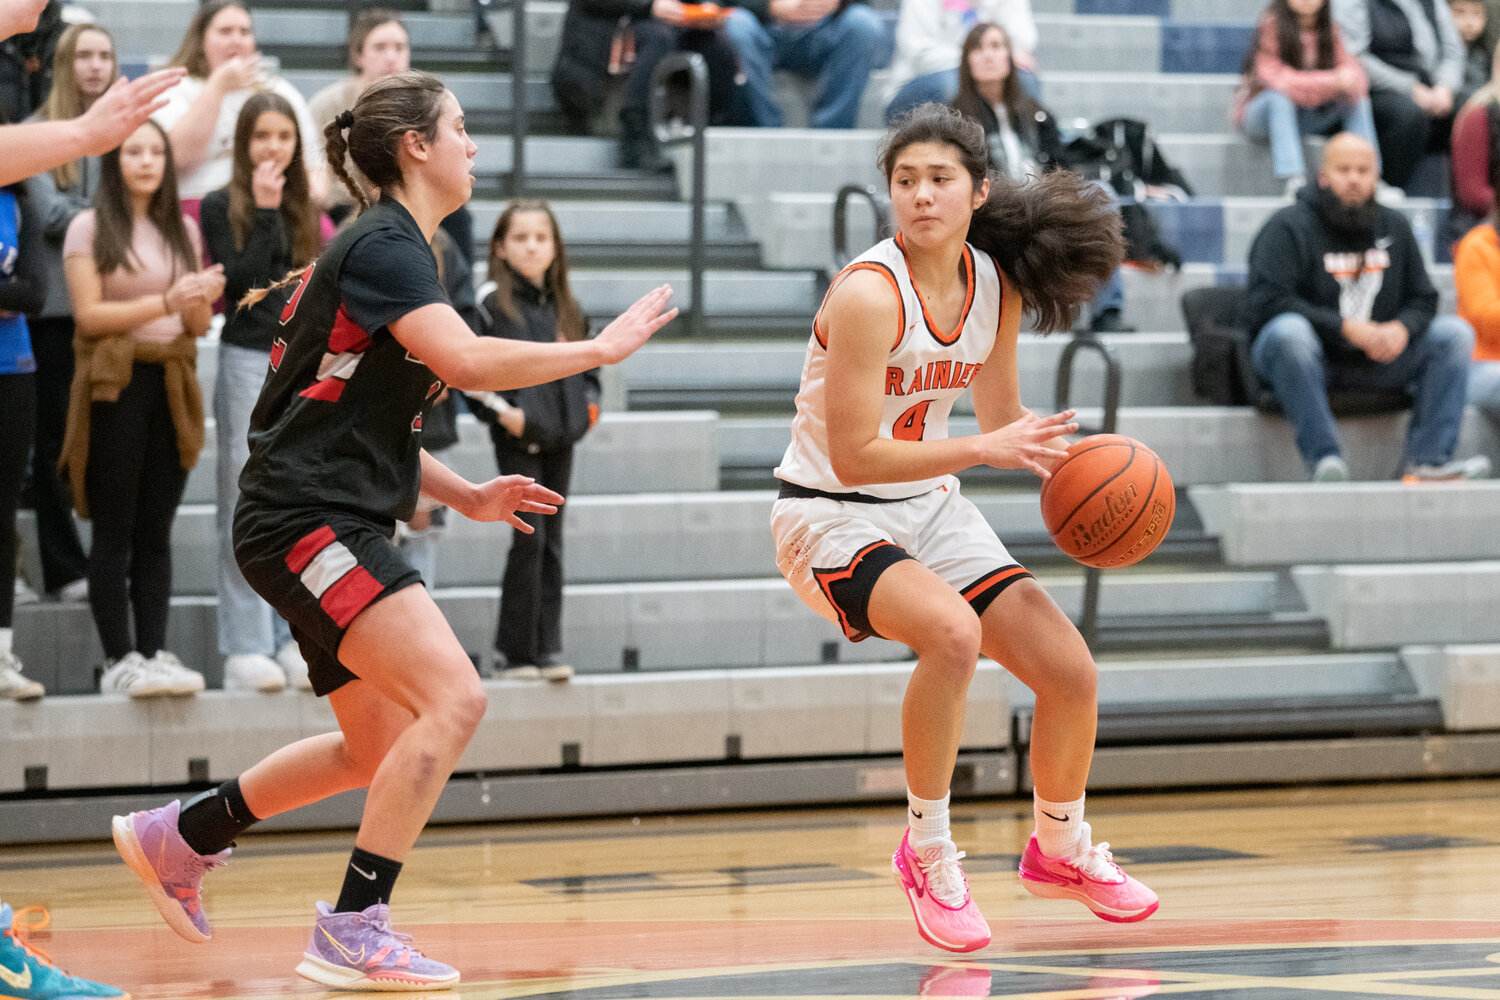 Angelica Askey looks for a pass into the paint during Rainier's 56-41 win over Neah Bay on Dec. 5.